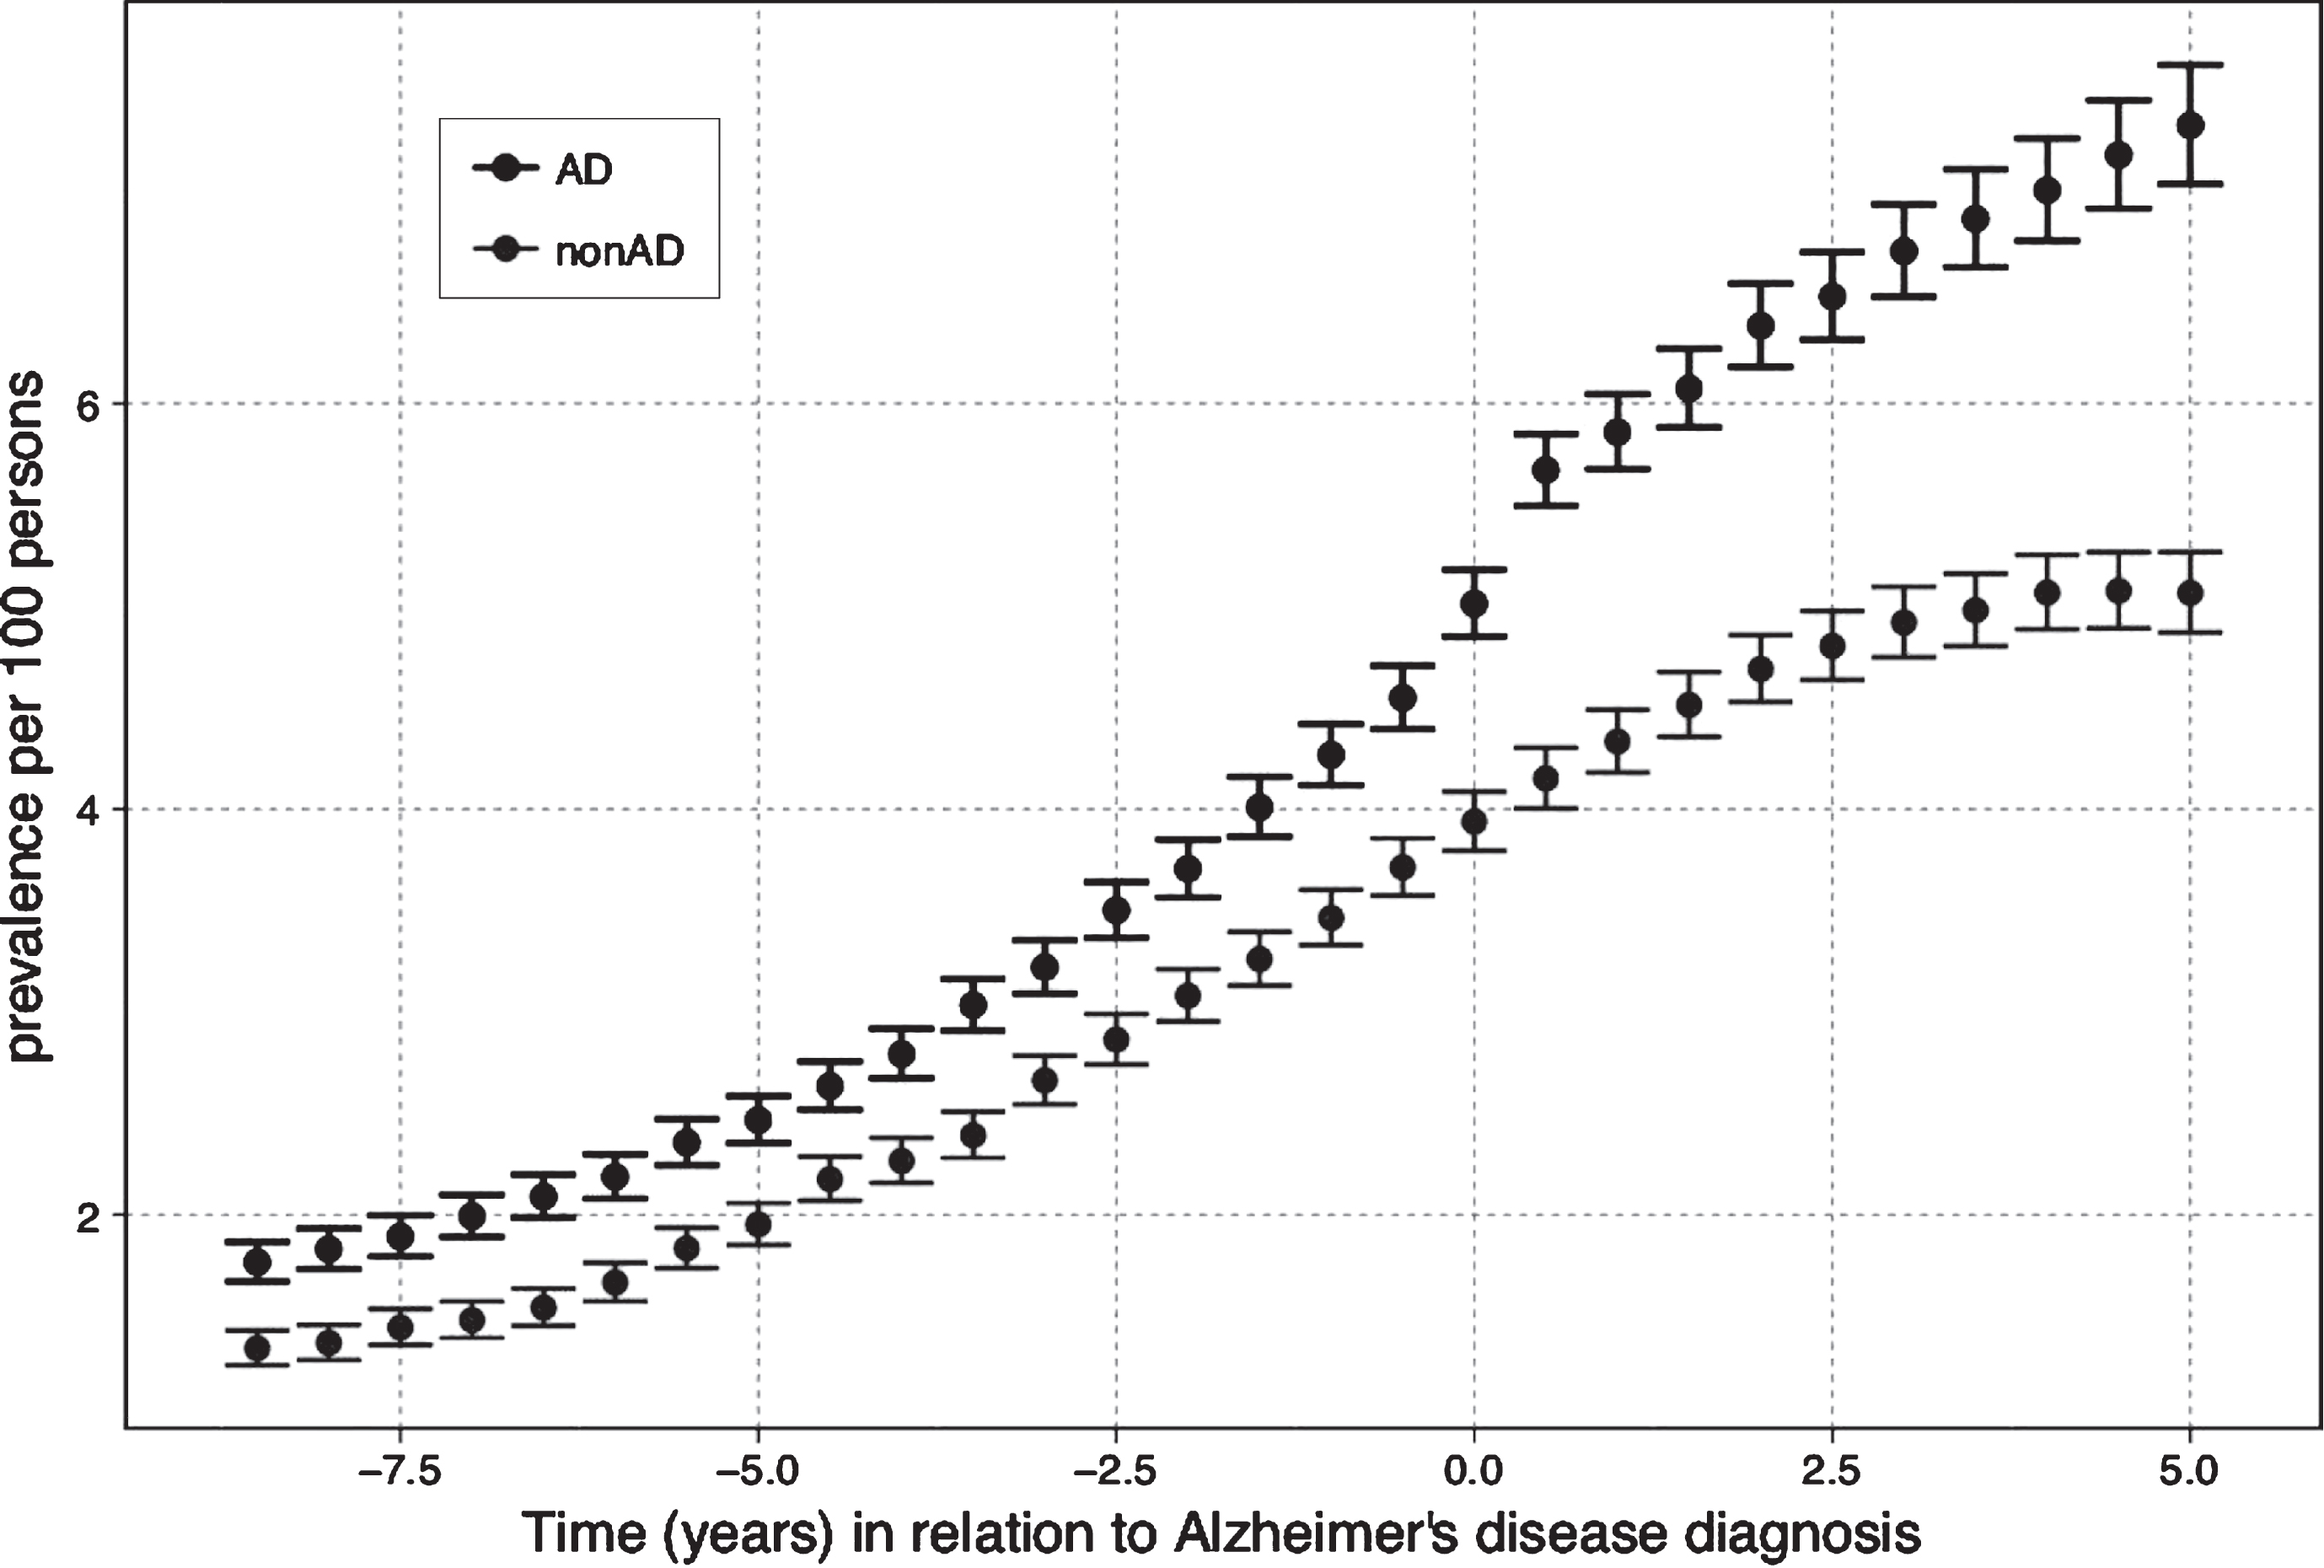 The Prevalence of antiepileptic use in relation to Alzheimer’s disease (AD) diagnosis.